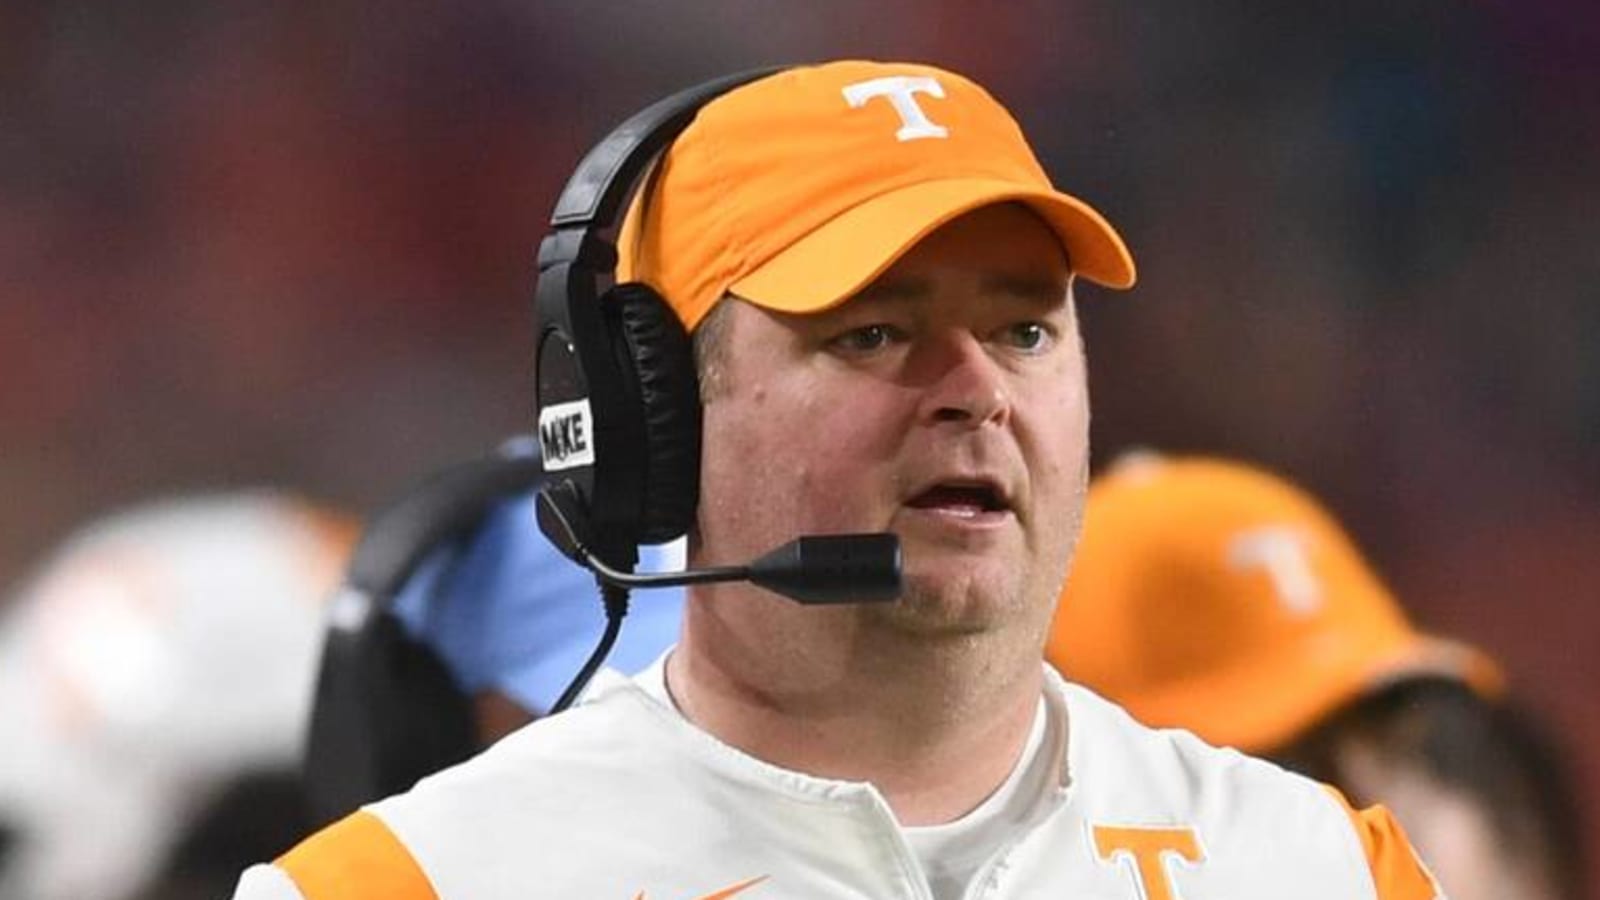 Heupel gets a well-earned extension from Tennessee